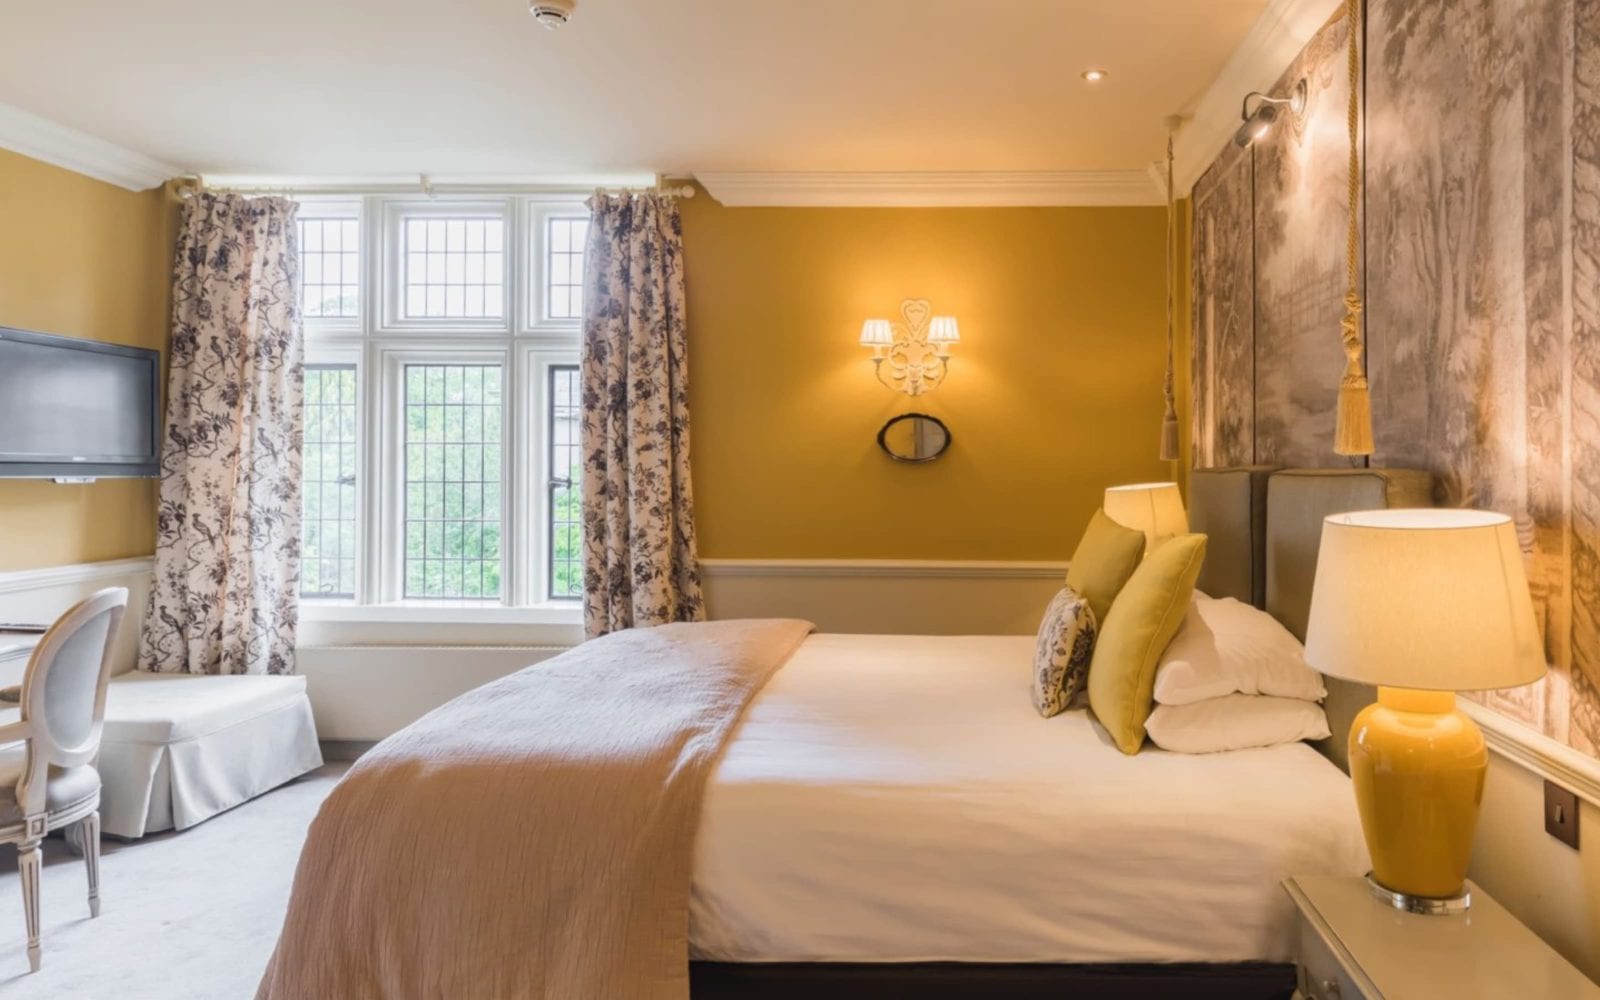 Hotel bed and breakfast package at coombe